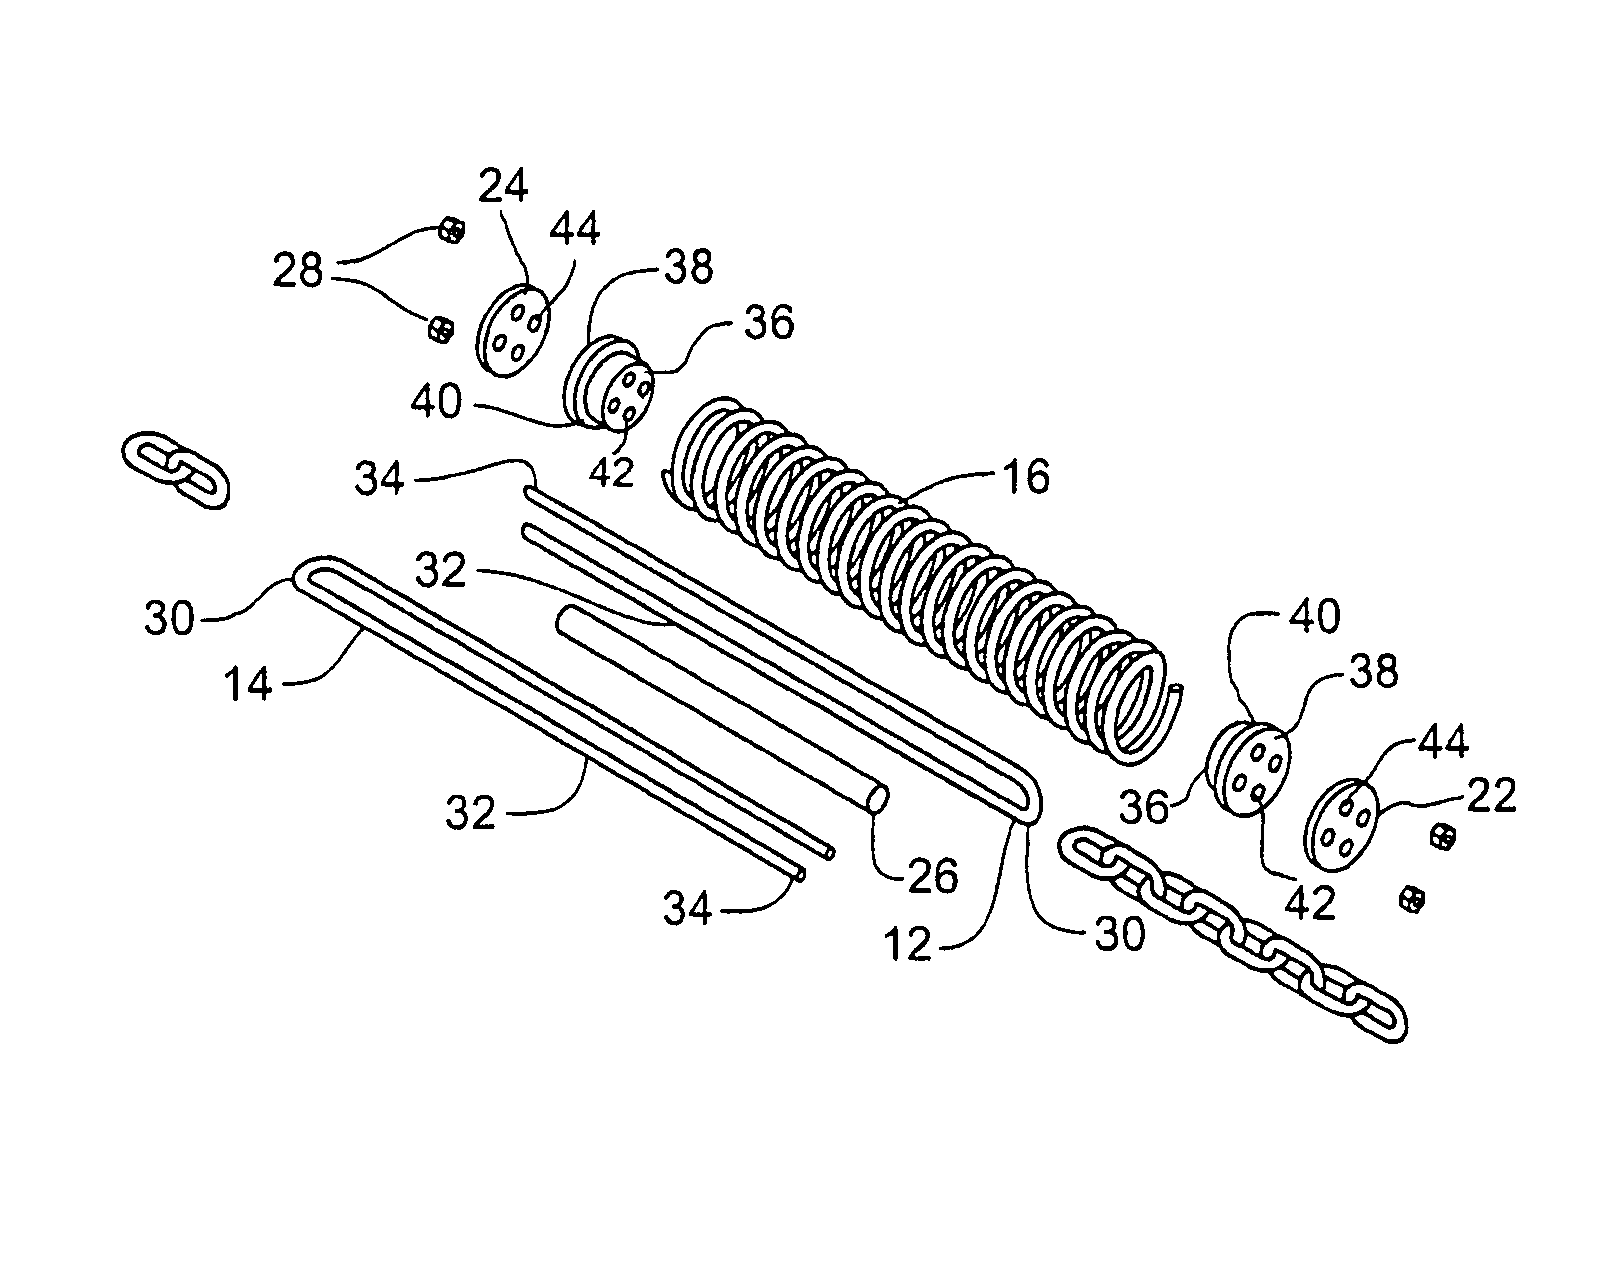 Damping spring for use in agricultural implements